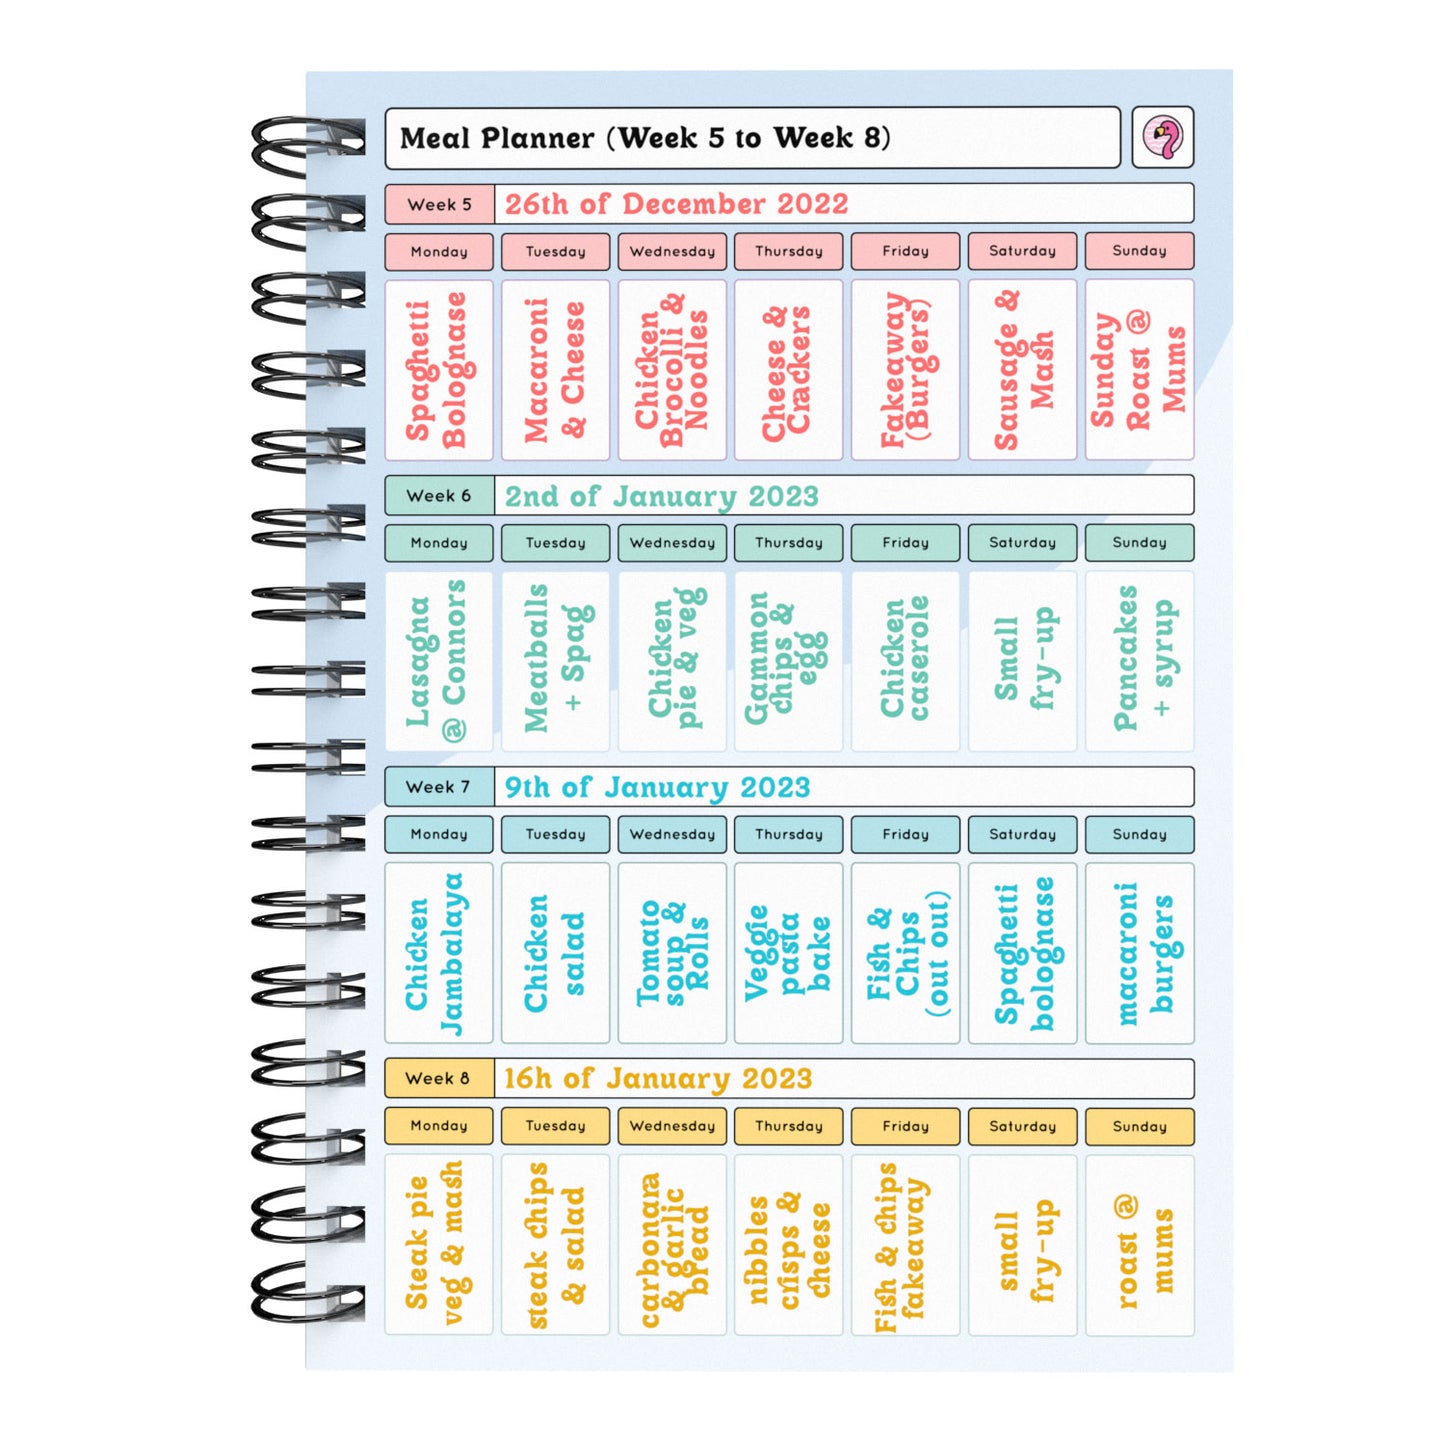 Food Diary - C59 - Calorie Counting